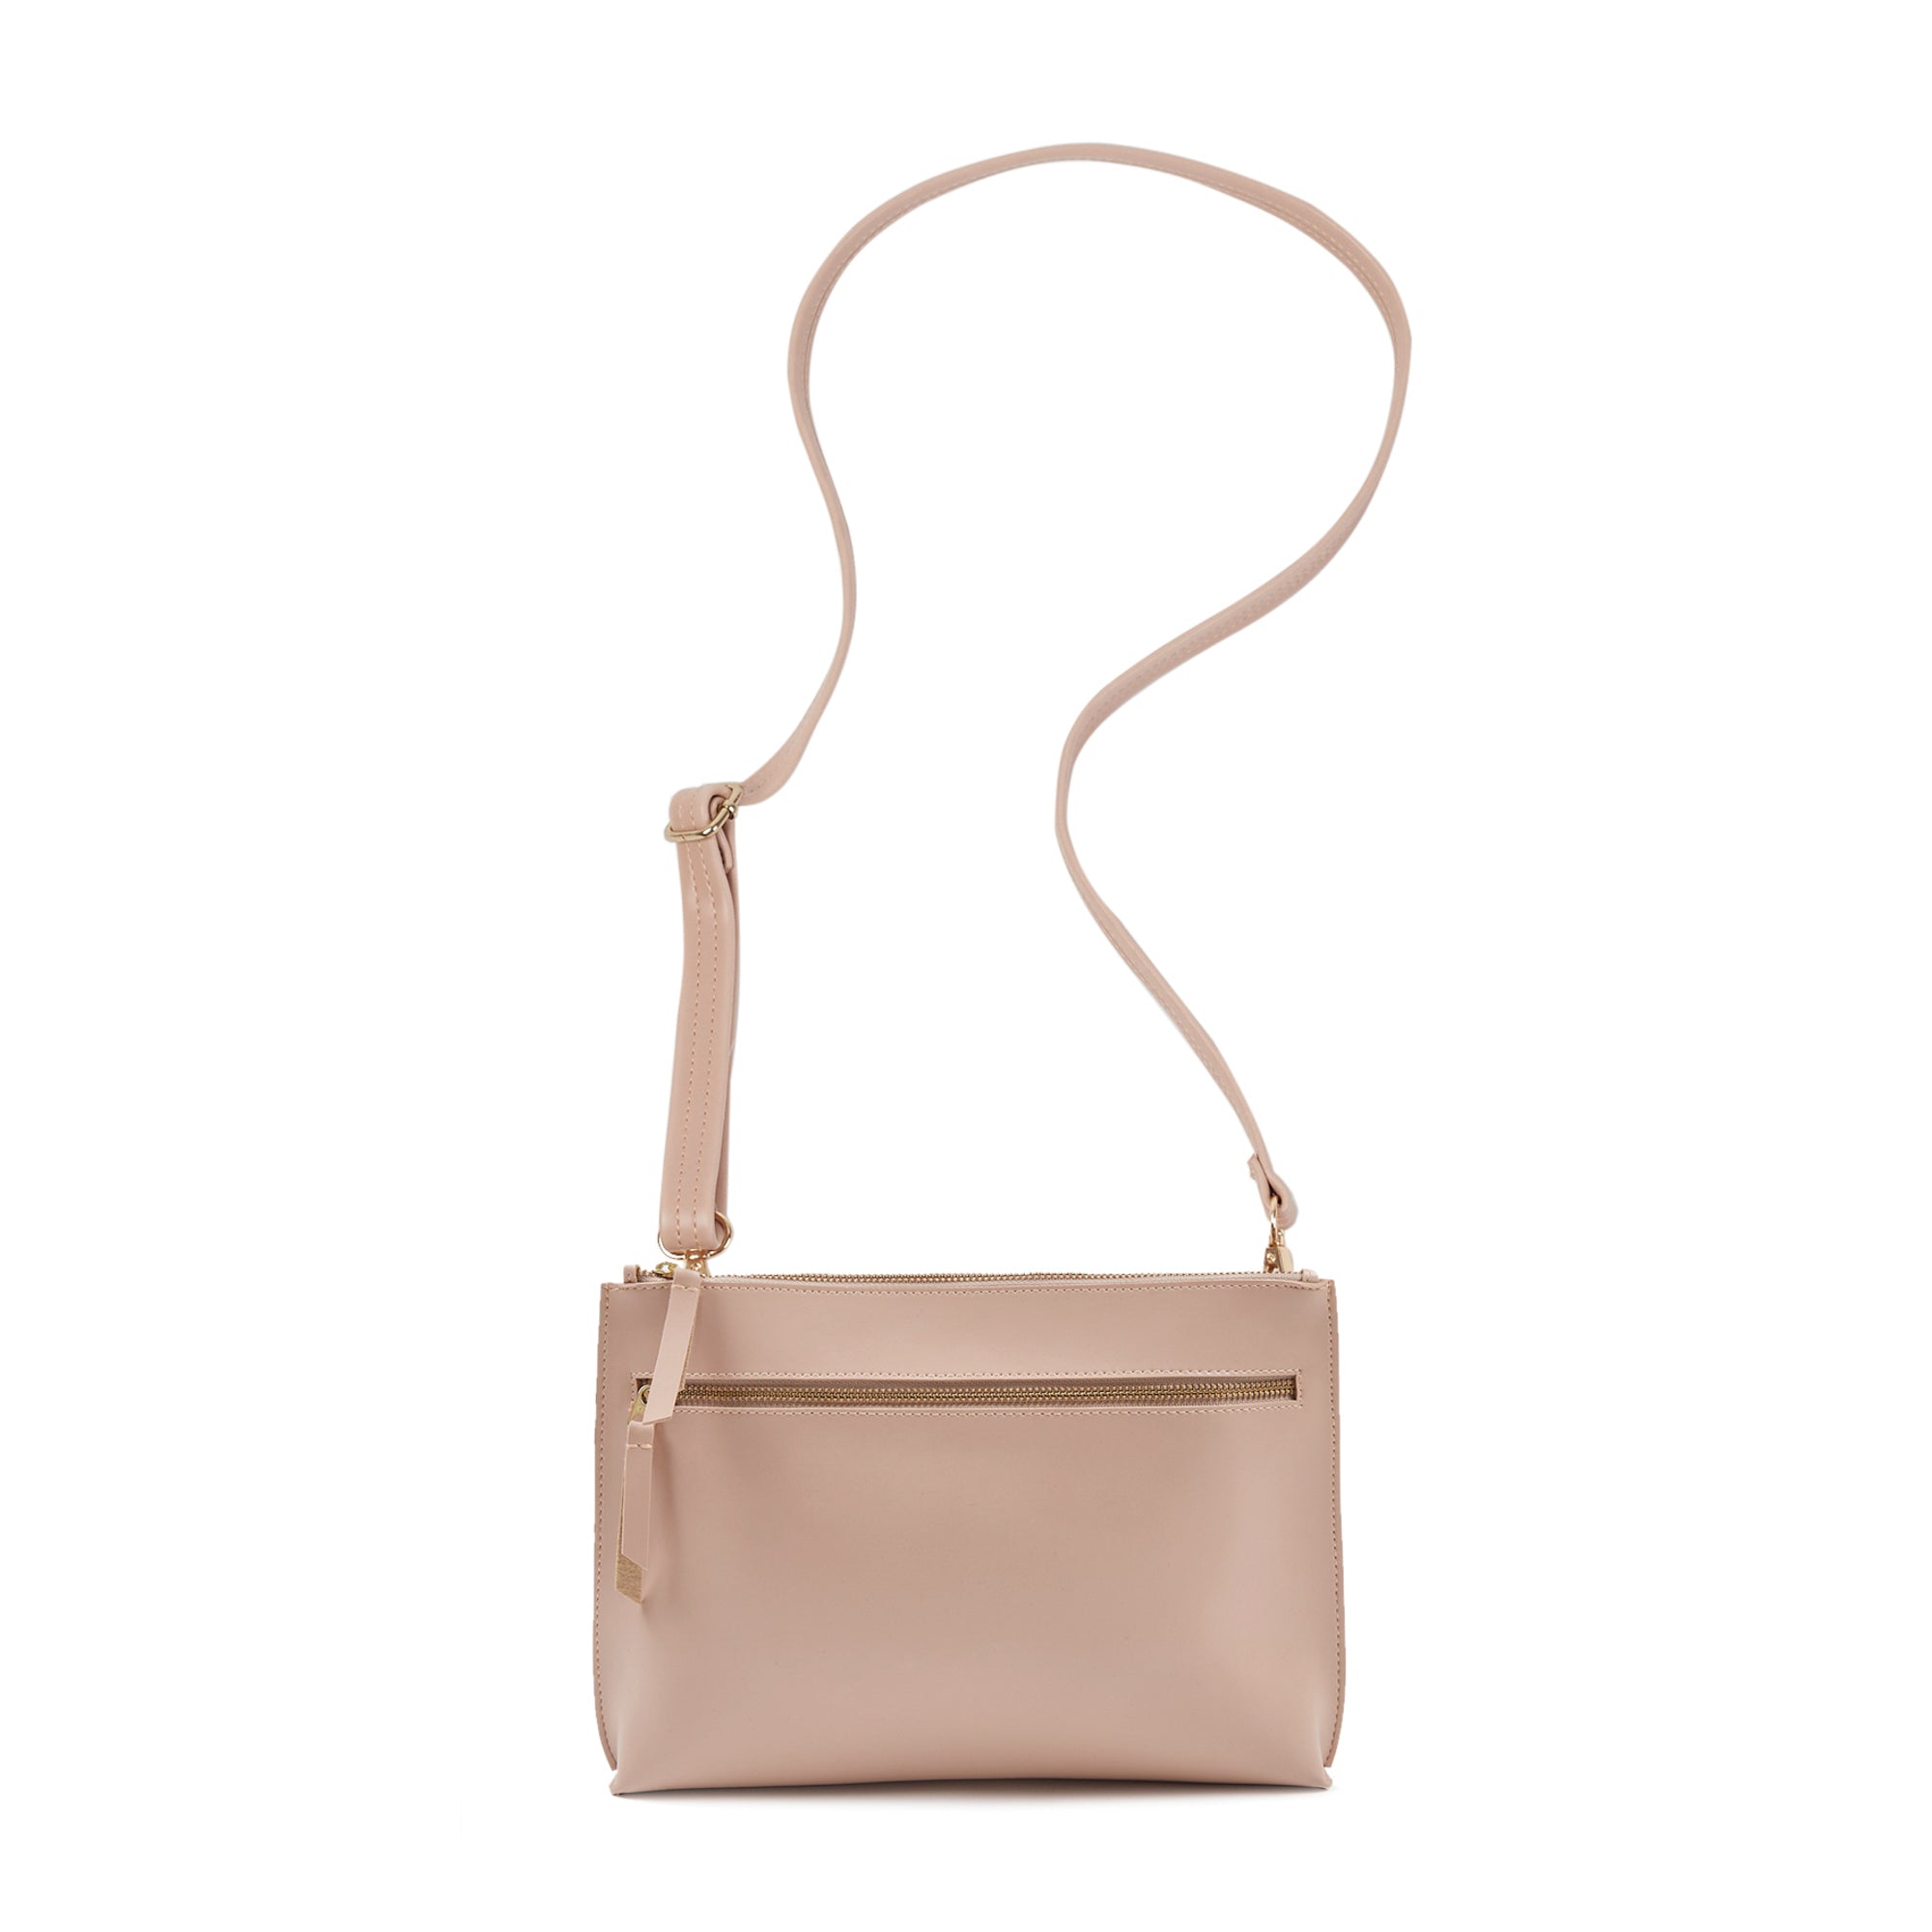 LOUIE VEGAN LEATHER SLING BAG BISCOTTO